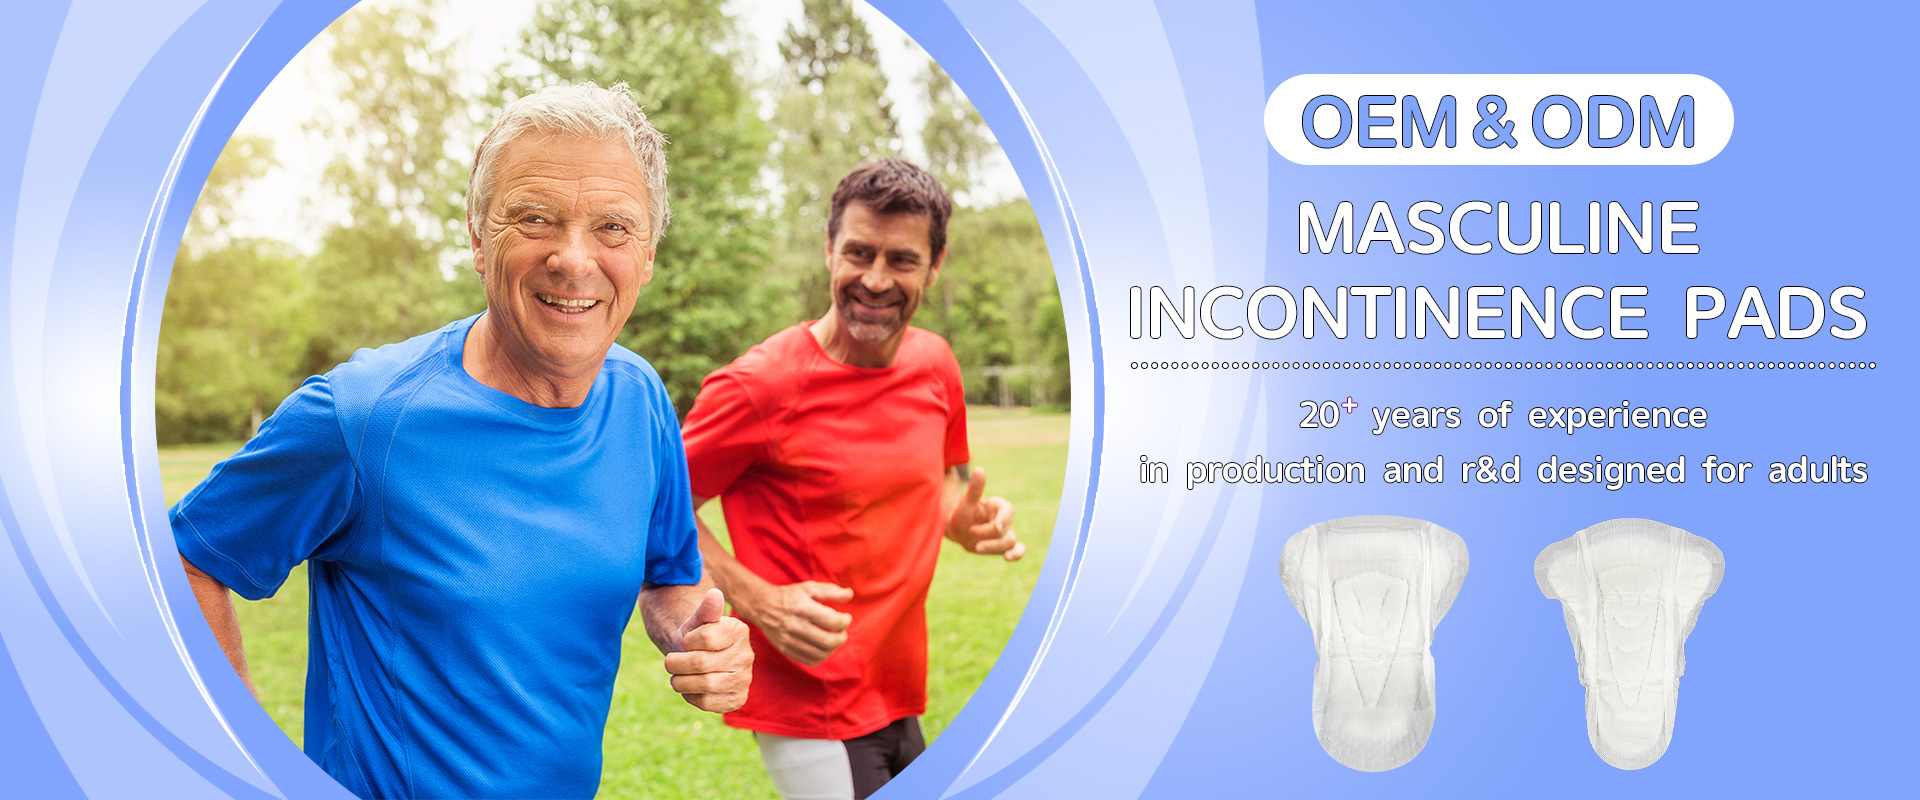 Urological Incontinence Pads